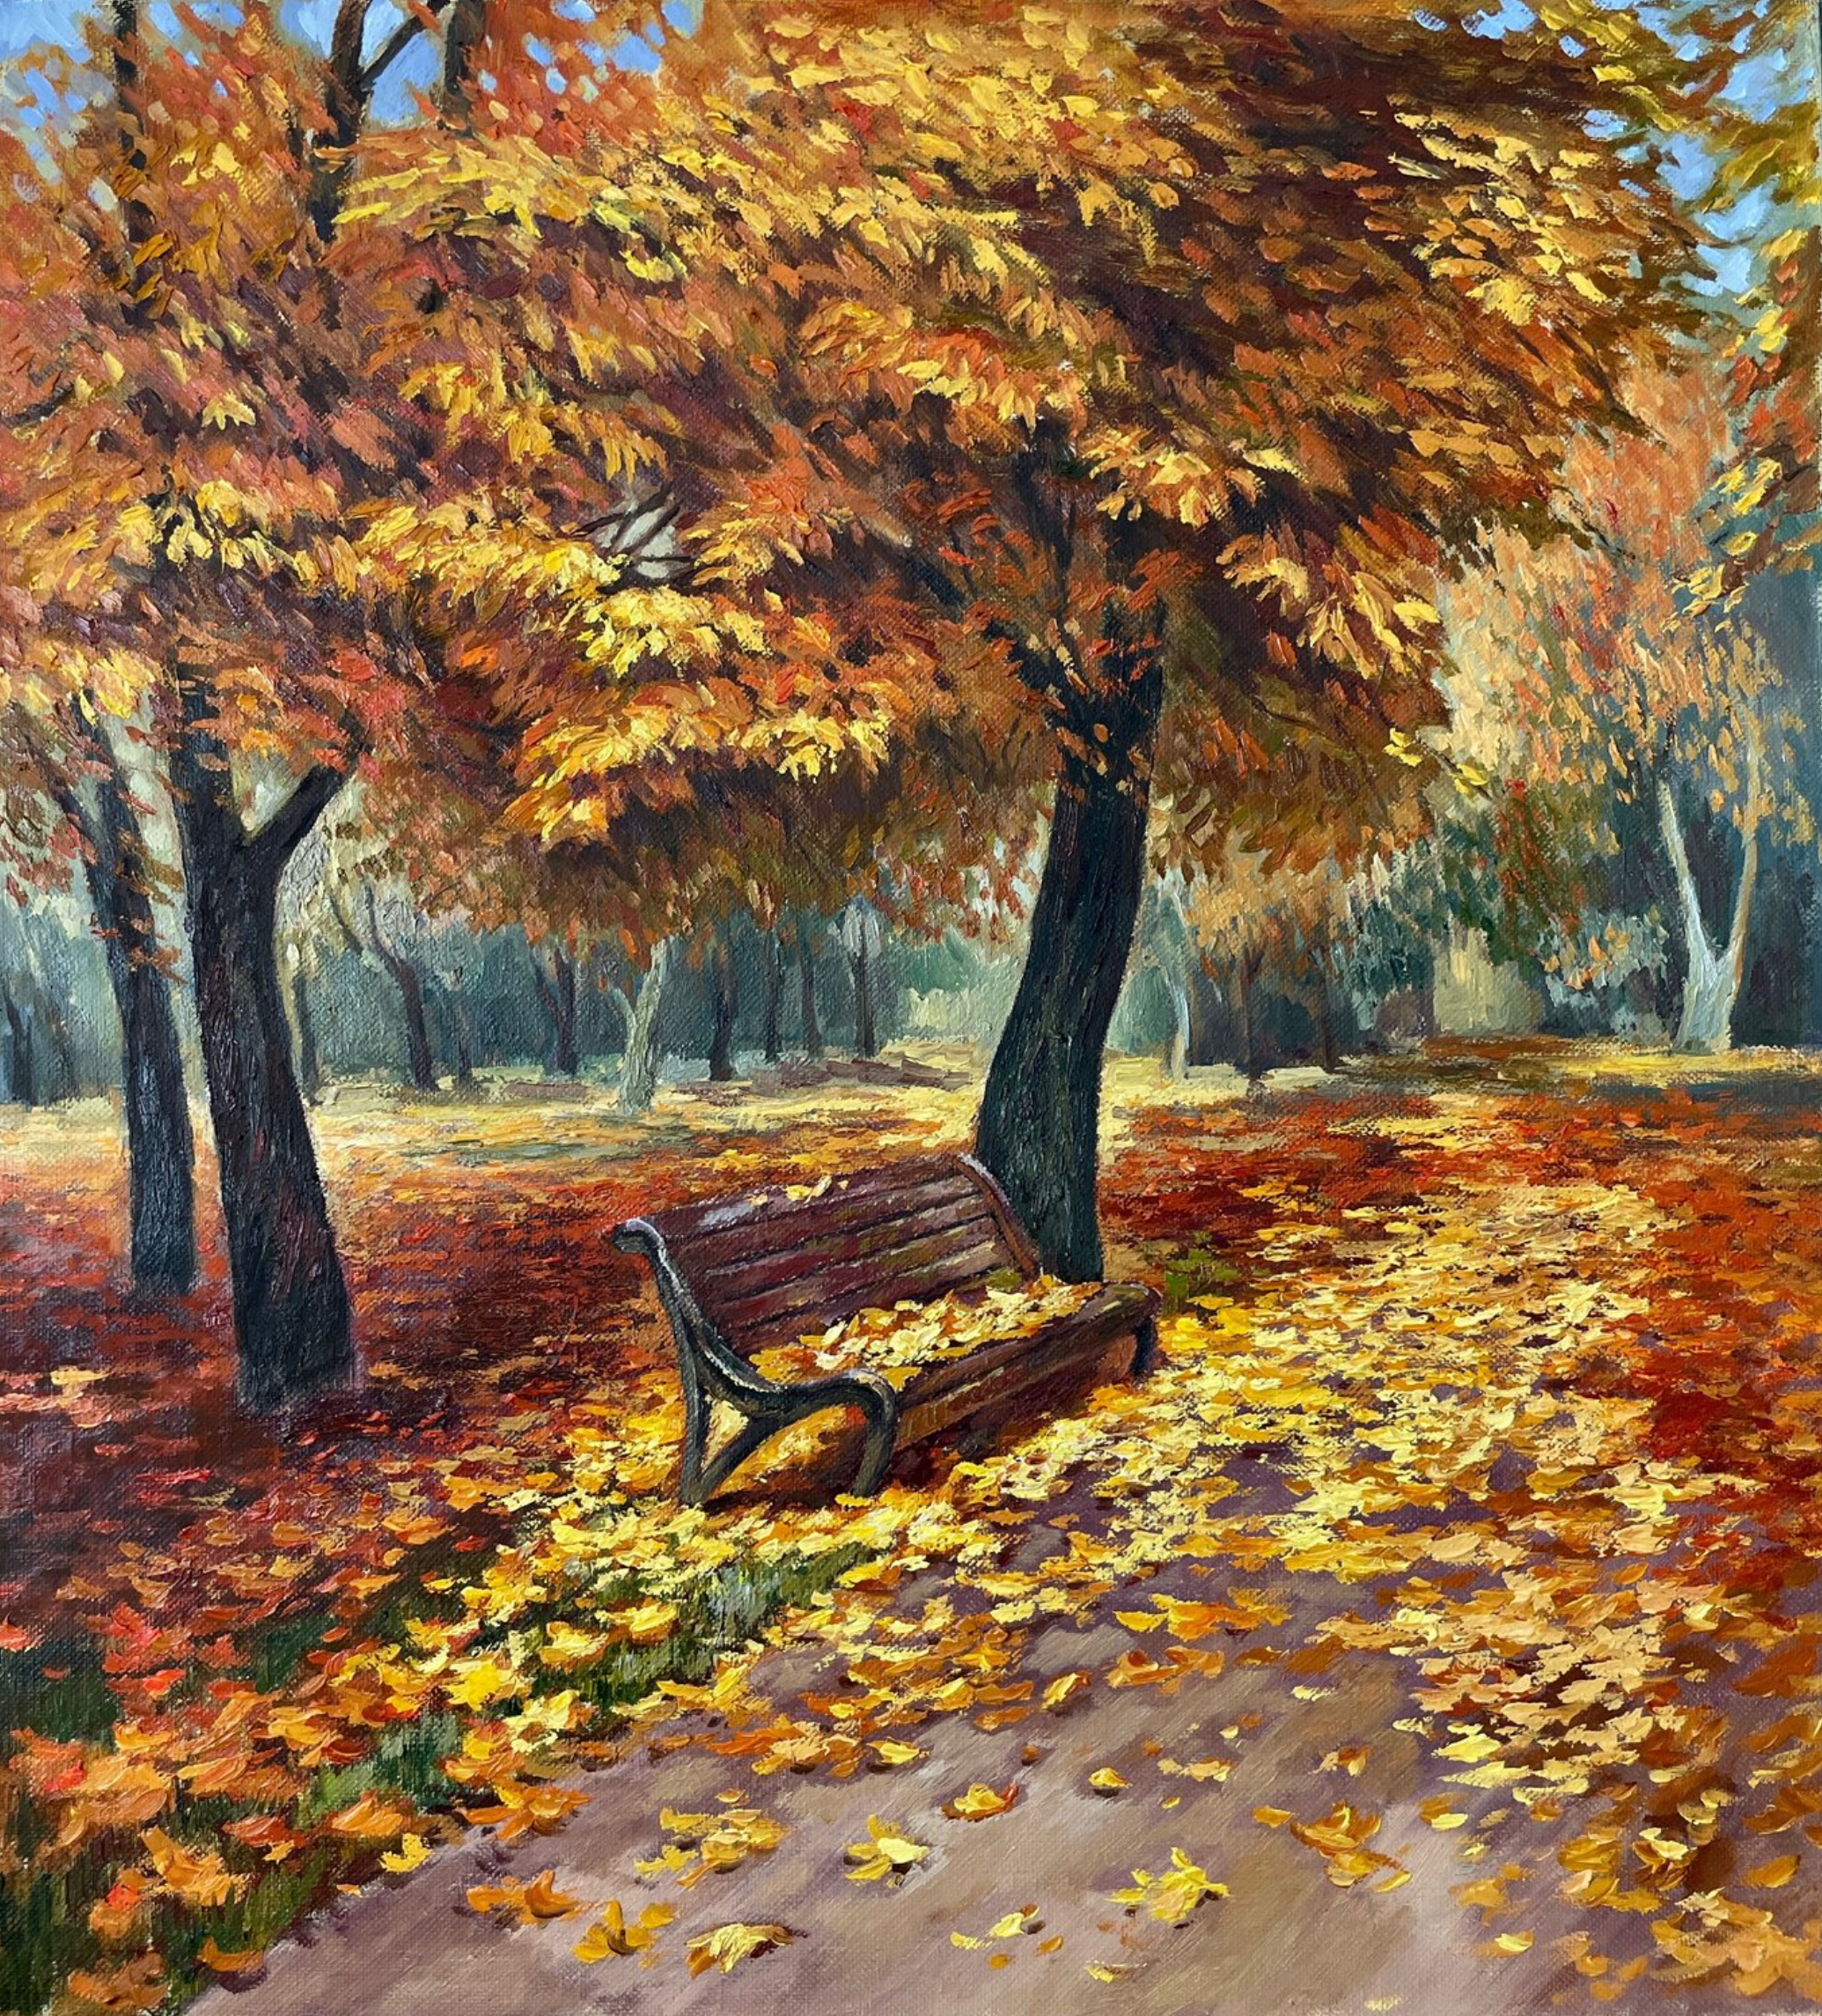 Anna Reznikova's "Leaf Fall" painting shows a wonderful autumn landscape. A park bench with autumn leaves in wonderful brown, yellow, red colours. Painted with brushes on cotton canvas.